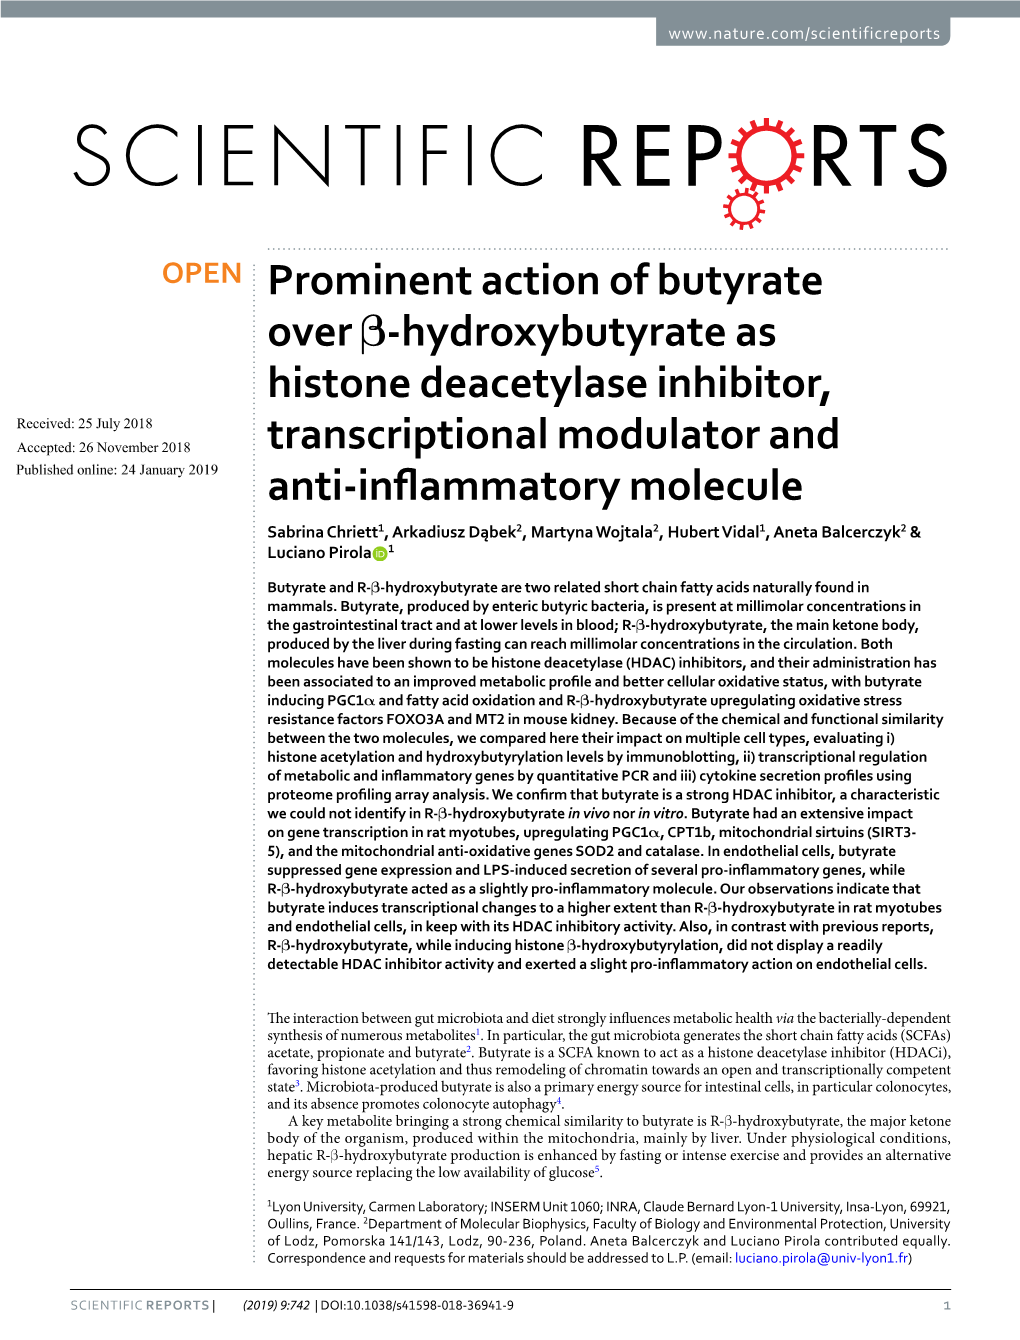 Prominent Action of Butyrate Over Β-Hydroxybutyrate As Histone